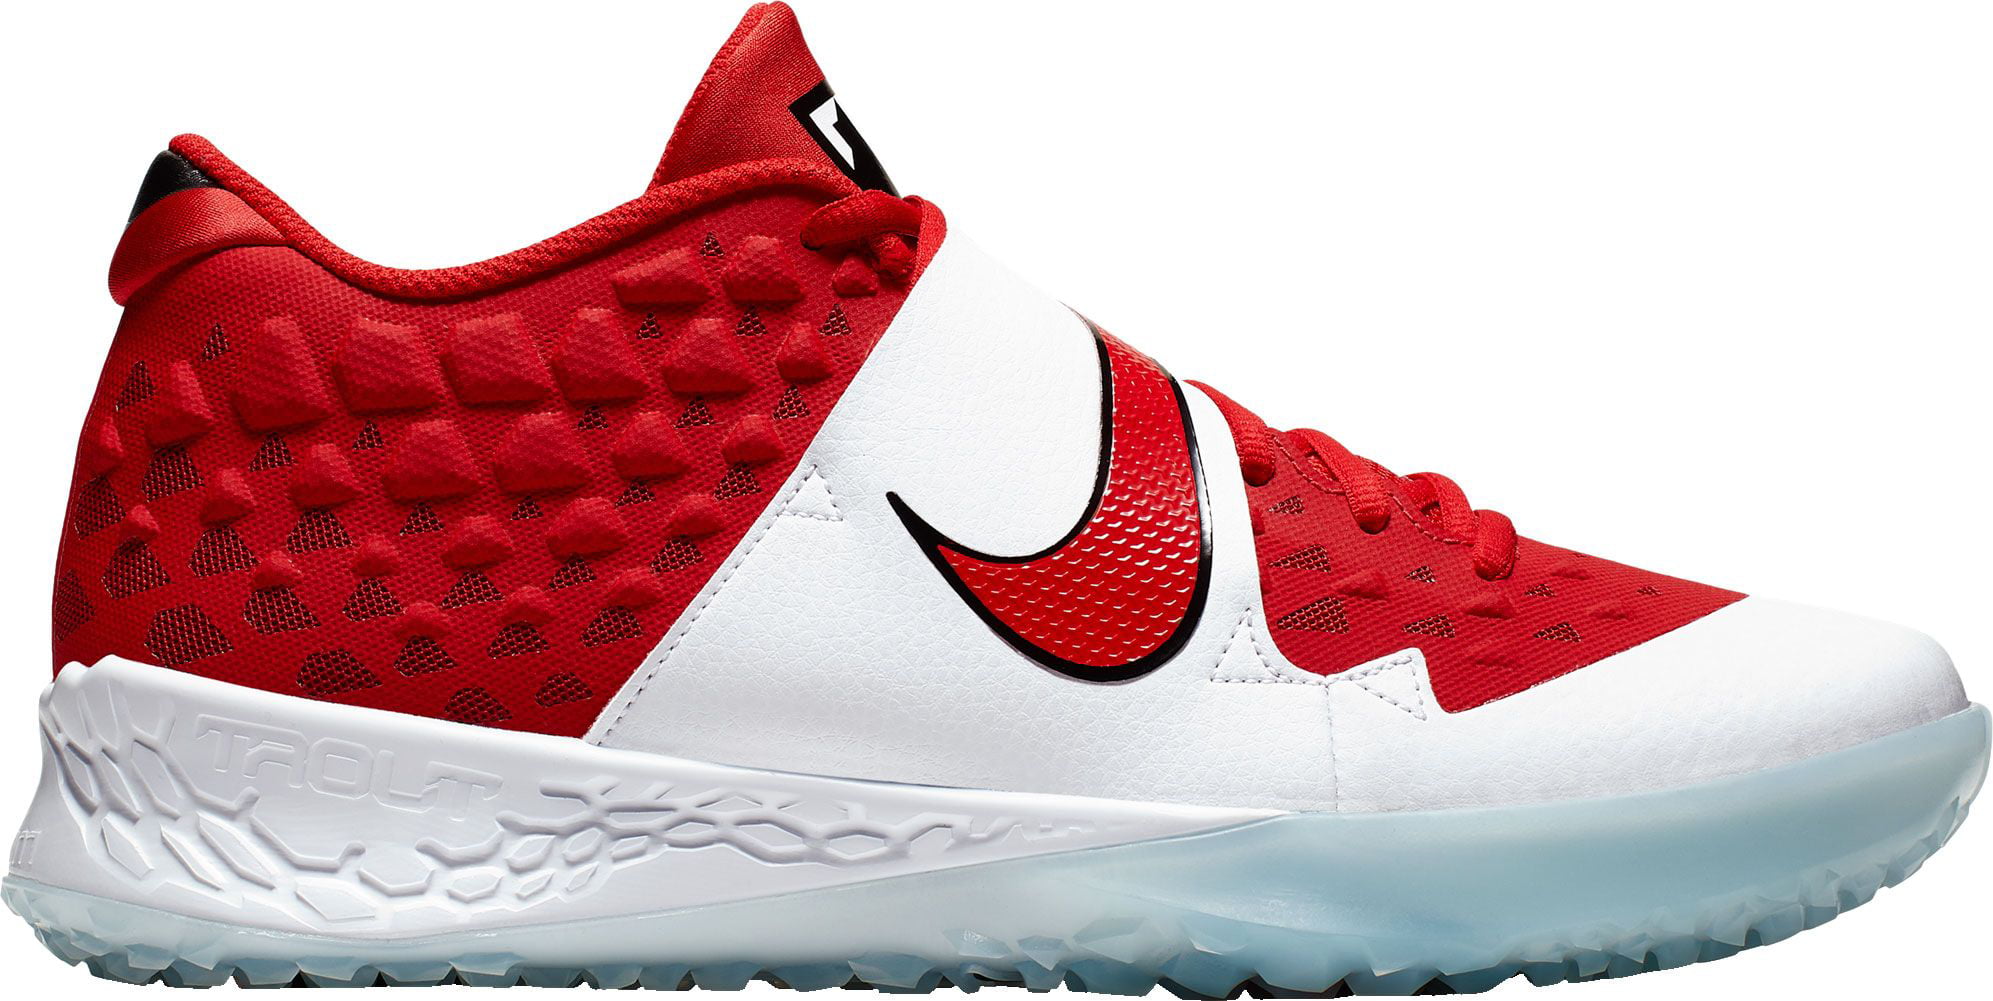 mike trout 6 turf shoes